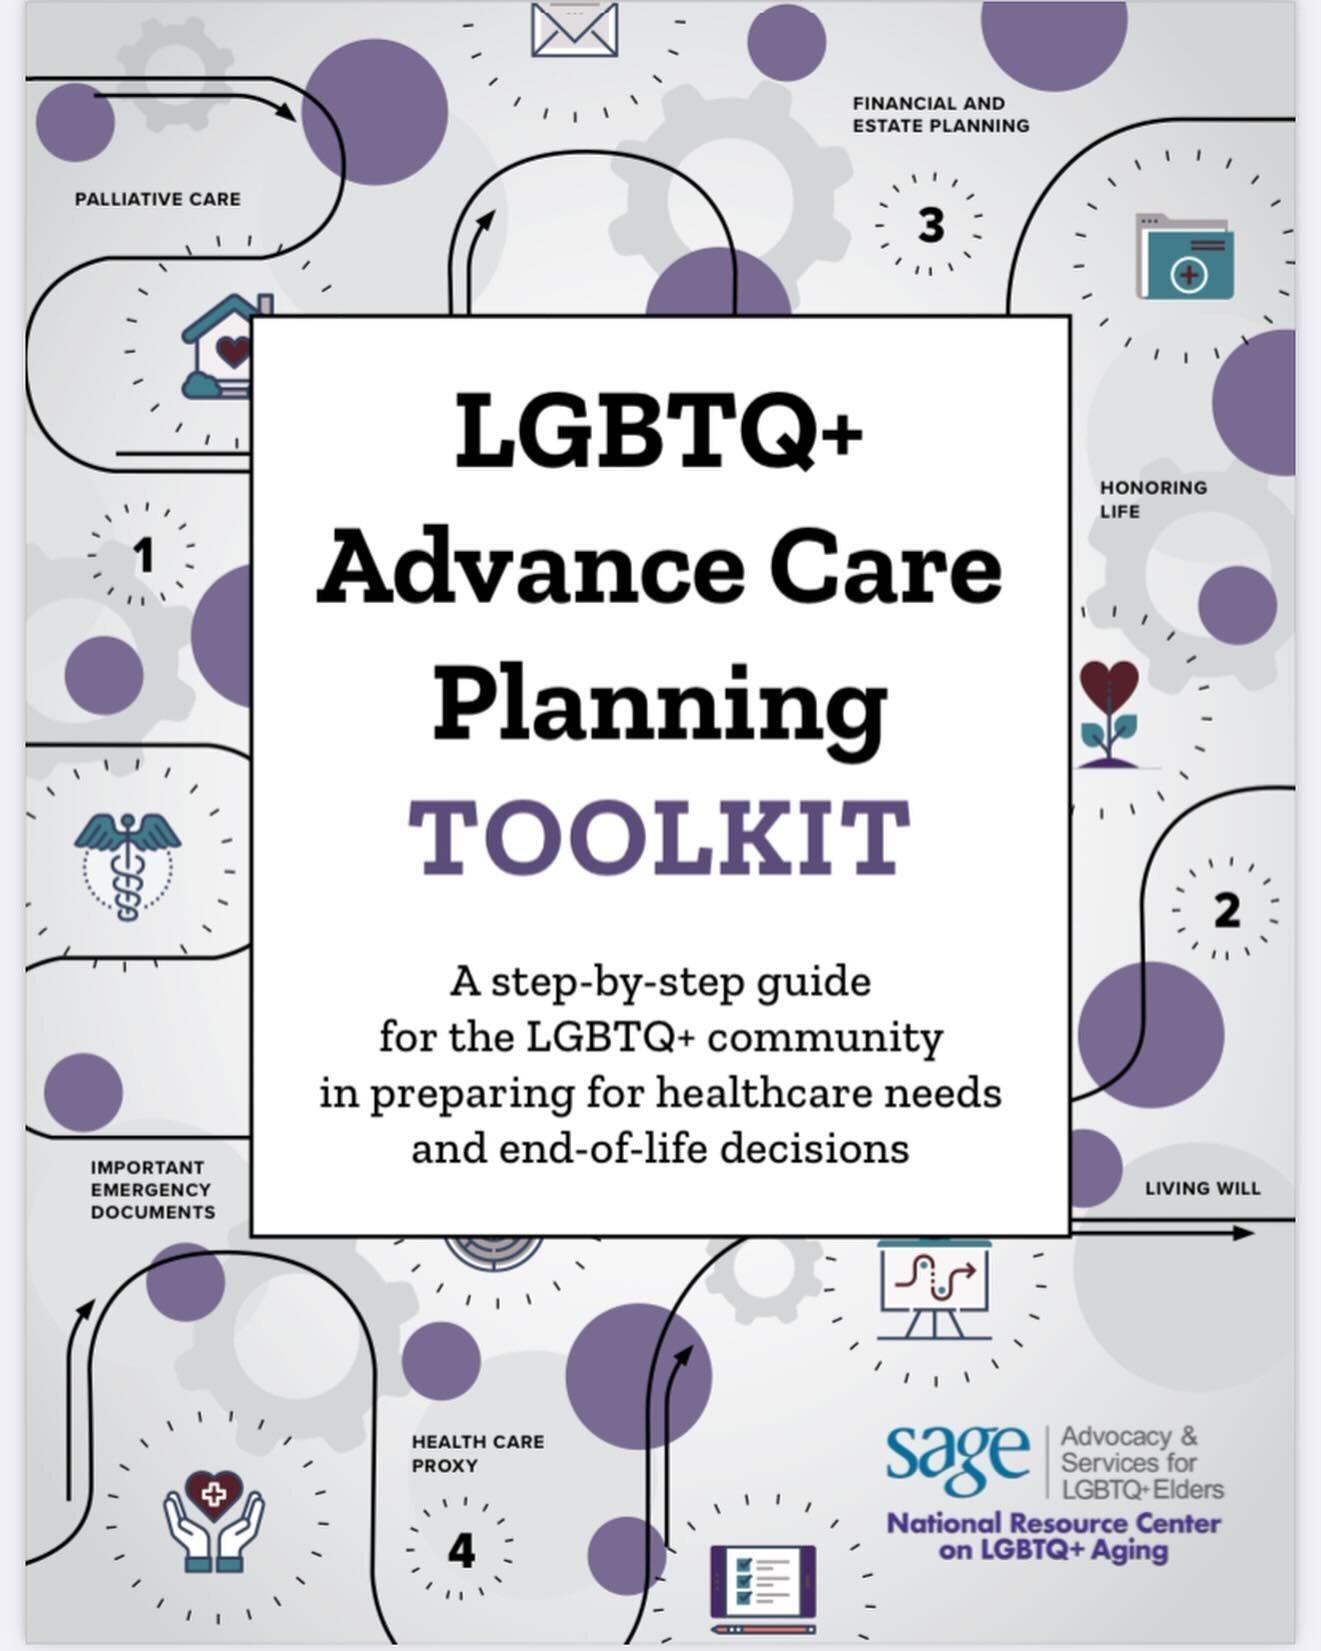 I tell everyone that advance care planning is a way to love your future self and those who love and will care for you 💝 

So, in honor of vday, I&rsquo;m very thrilled to share this LGBTQ+ Advance Care Planning Toolkit that I collaborated on - now a